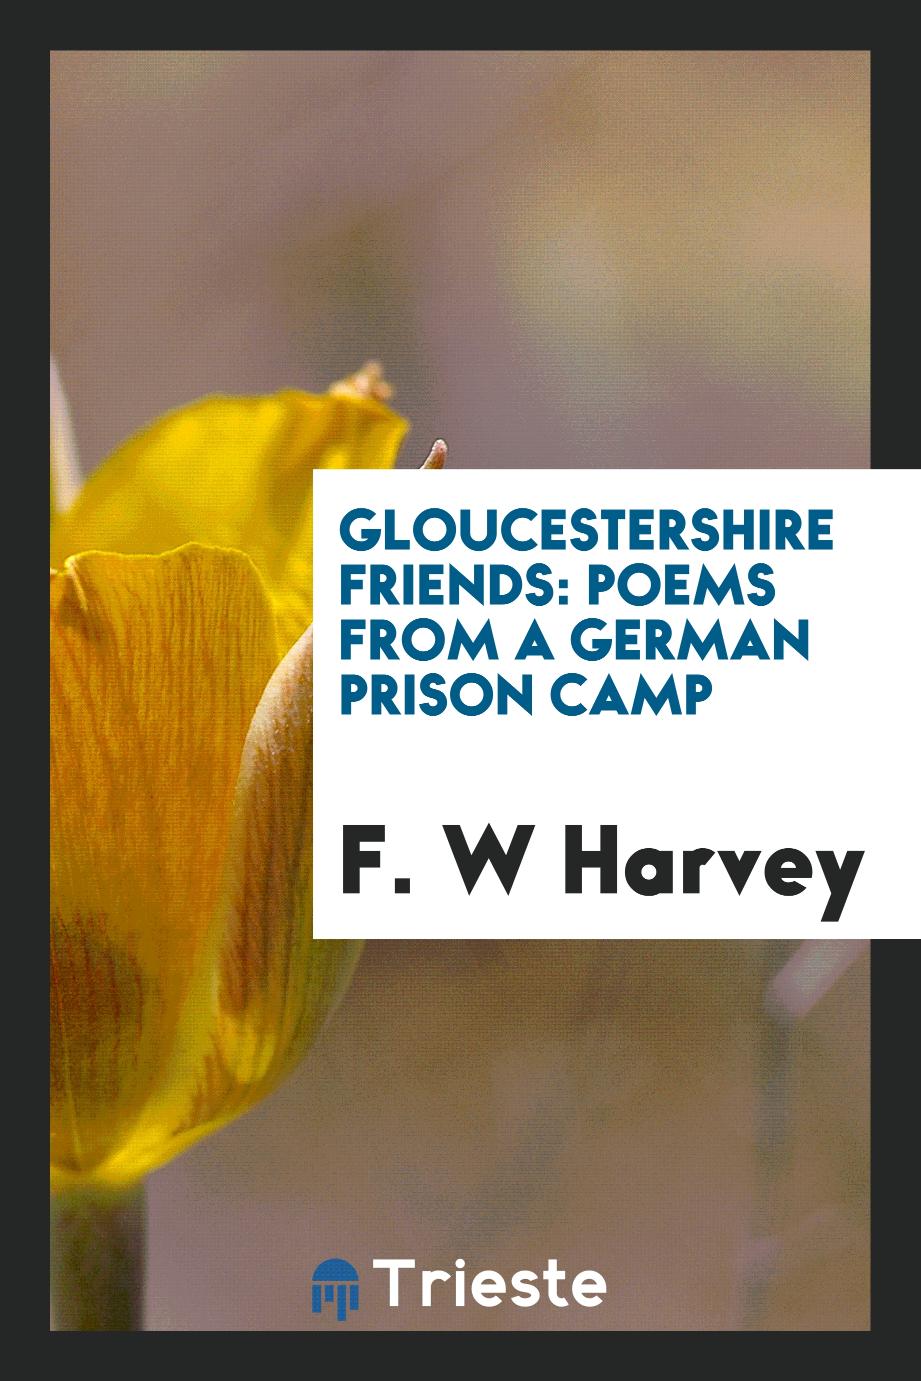 Gloucestershire friends: poems from a German prison camp